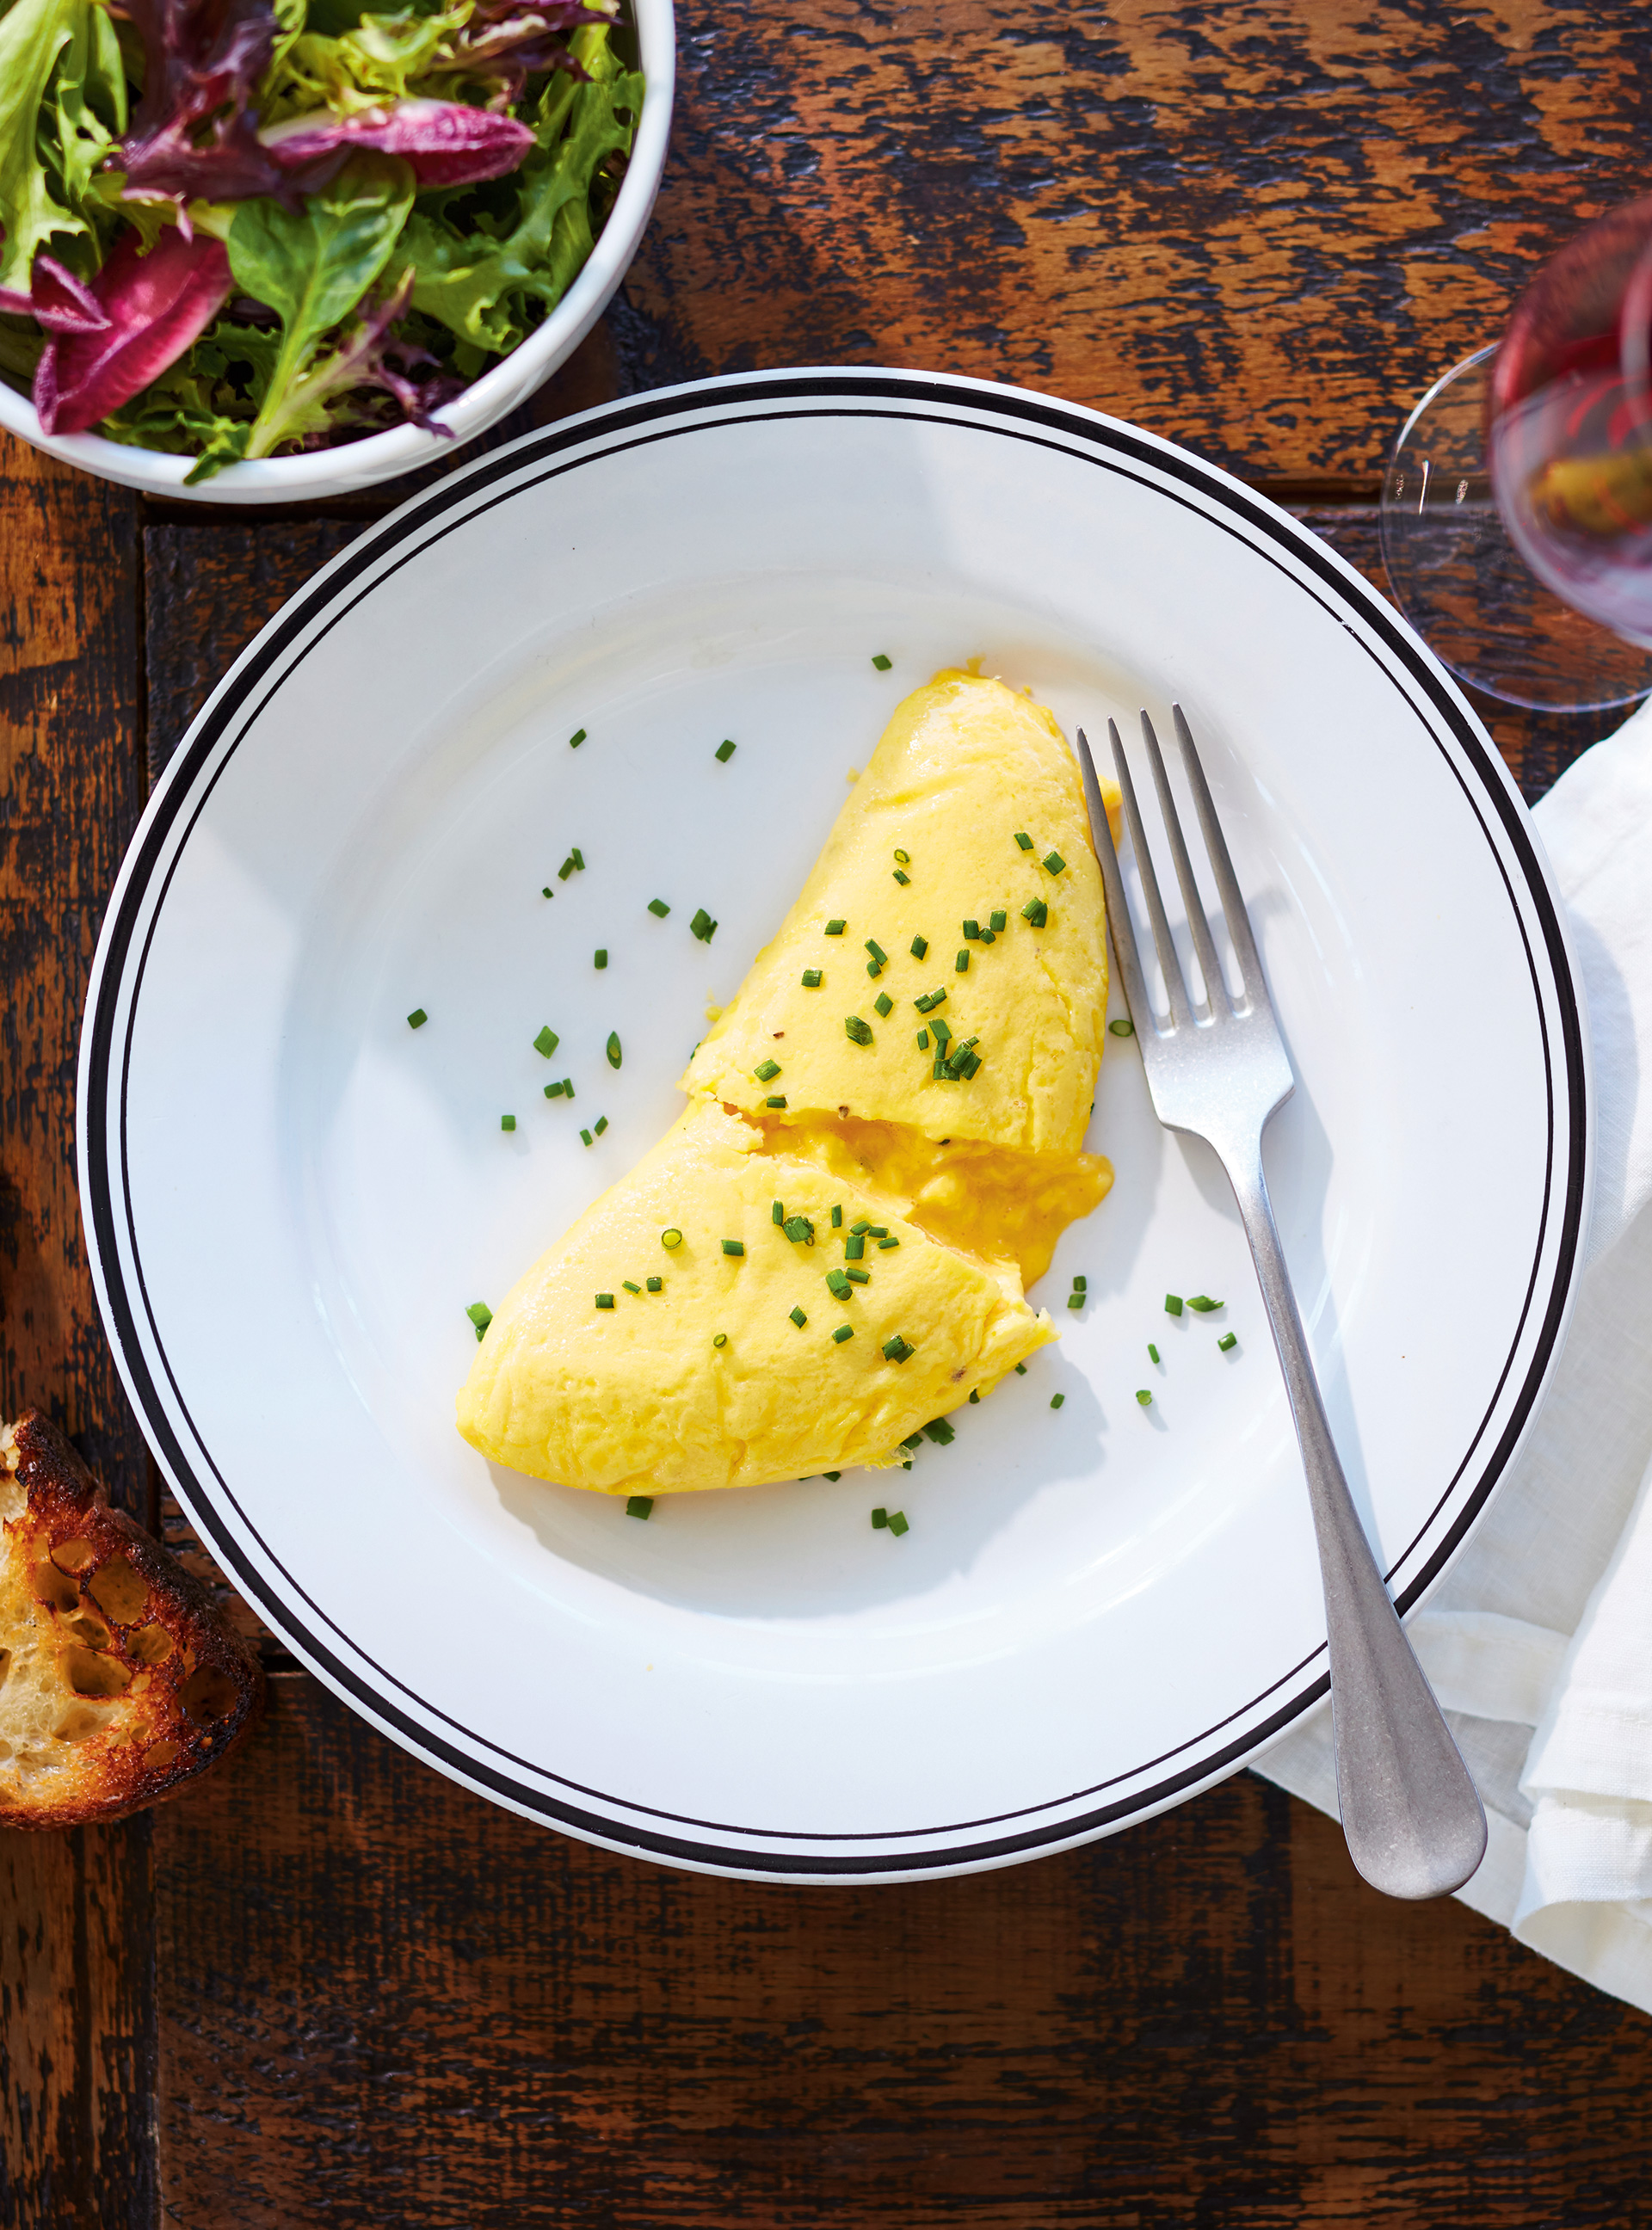 French Omelette (The Best)